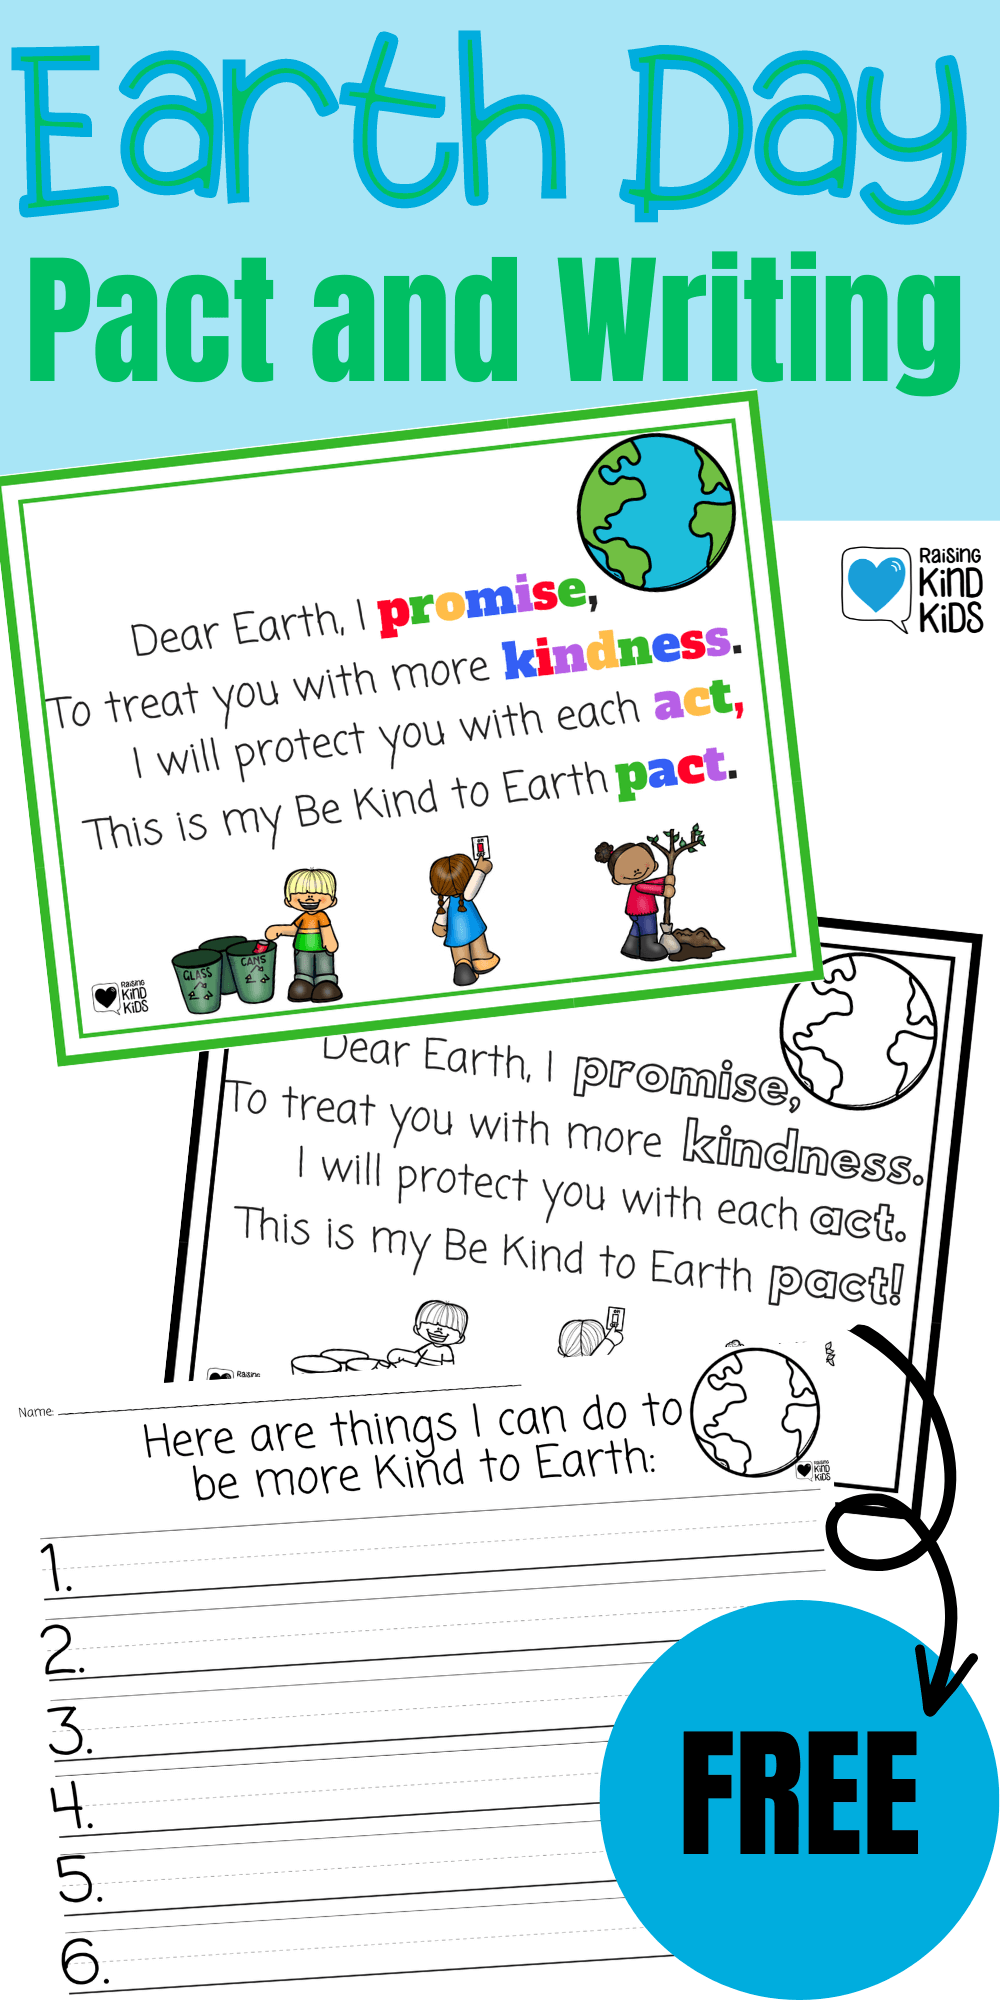 Use this Be Kind to Earth Pact to help kids be kind to Earth and learn ways they can help protect the planet. 